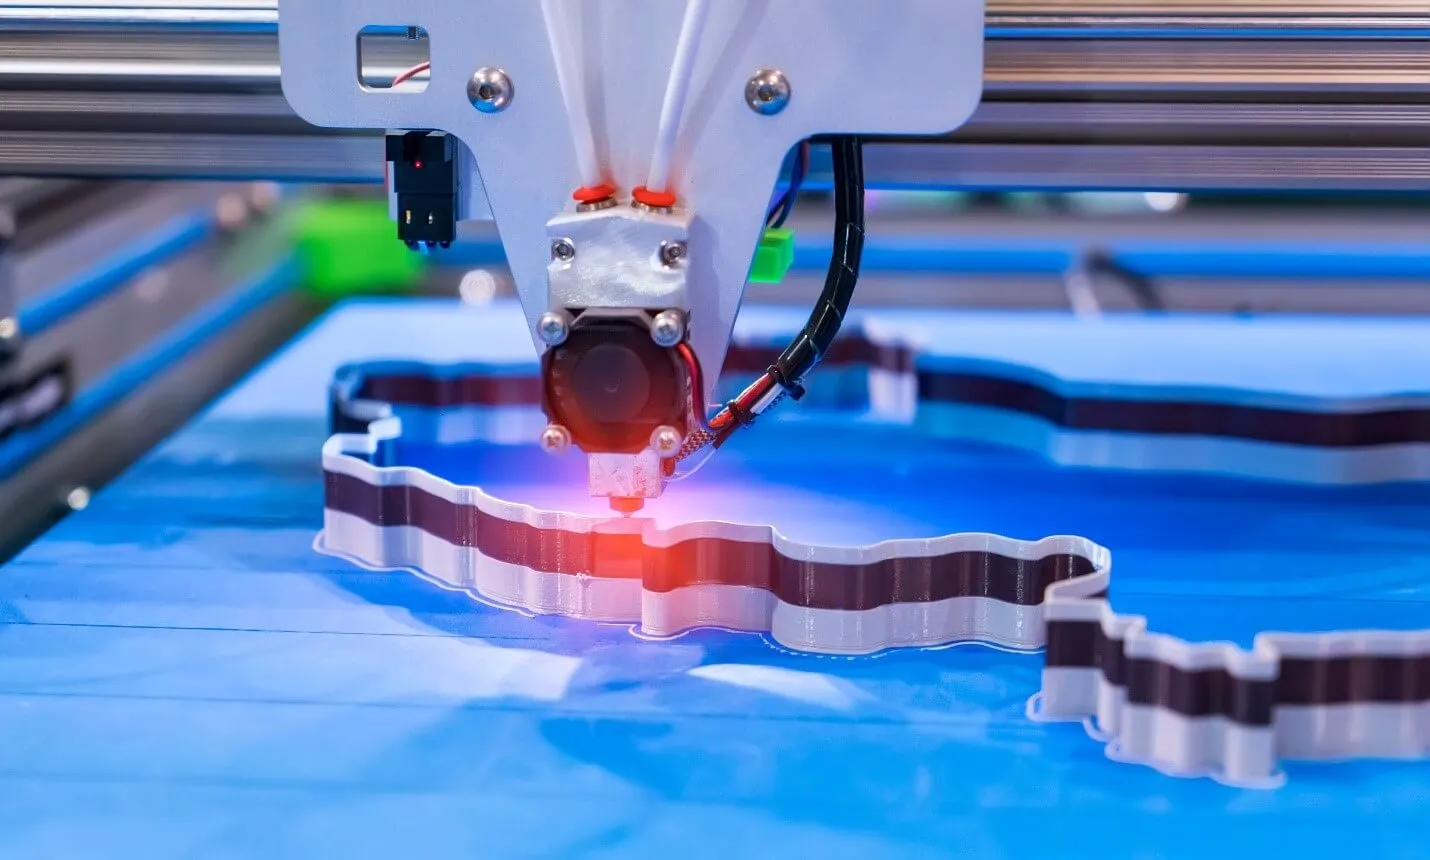 The Top Challenges in Additive Manufacturing and How to Overcome Them